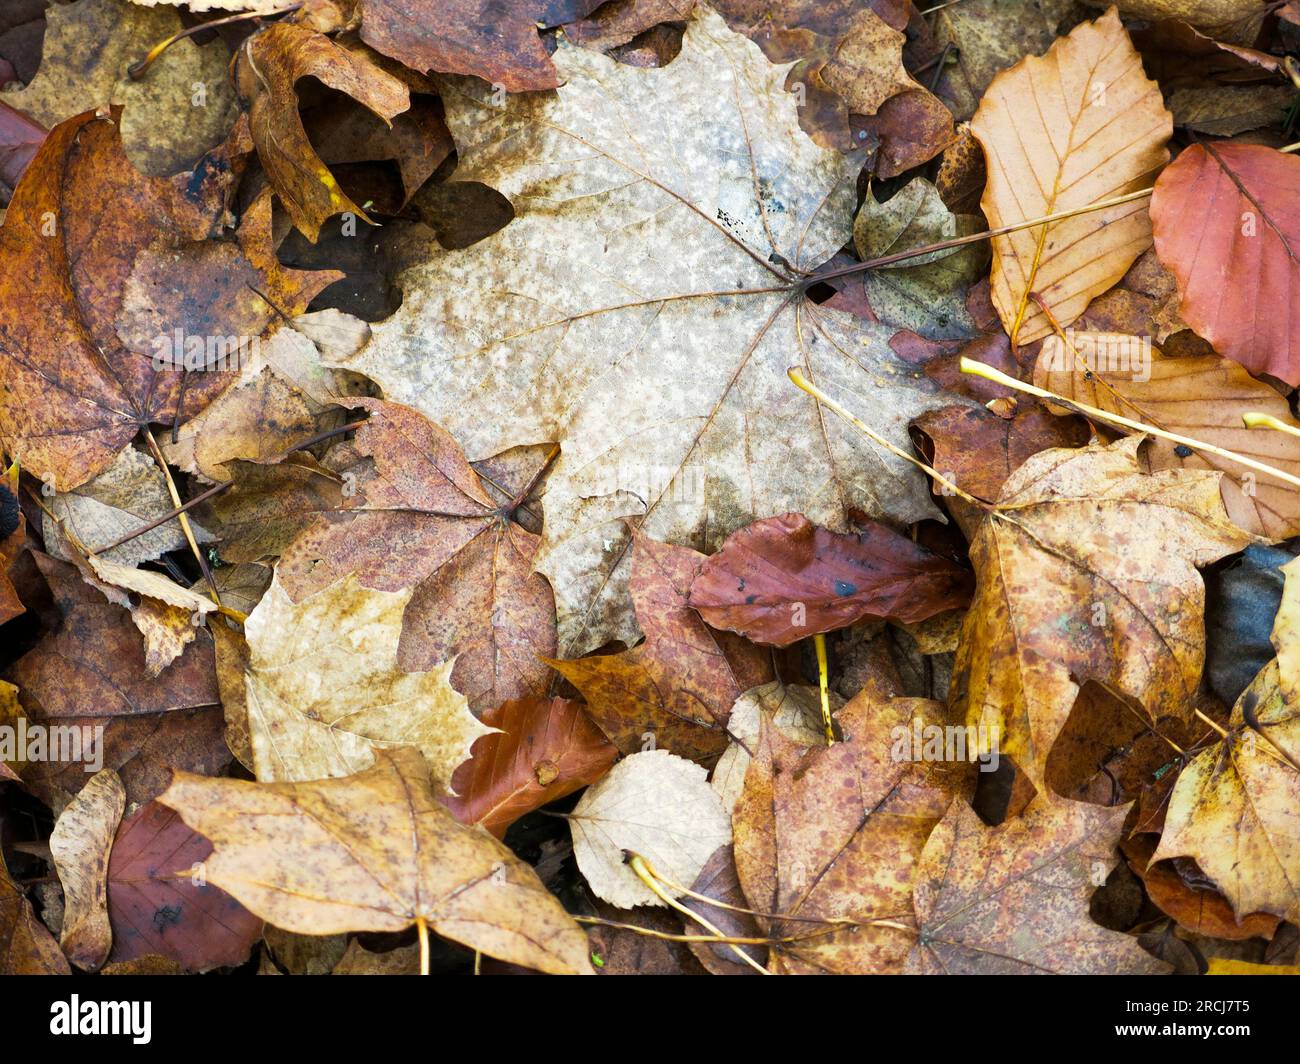 DRY AUTUMN LEAVES that have fallen off and ended up on the ground Stock Photo